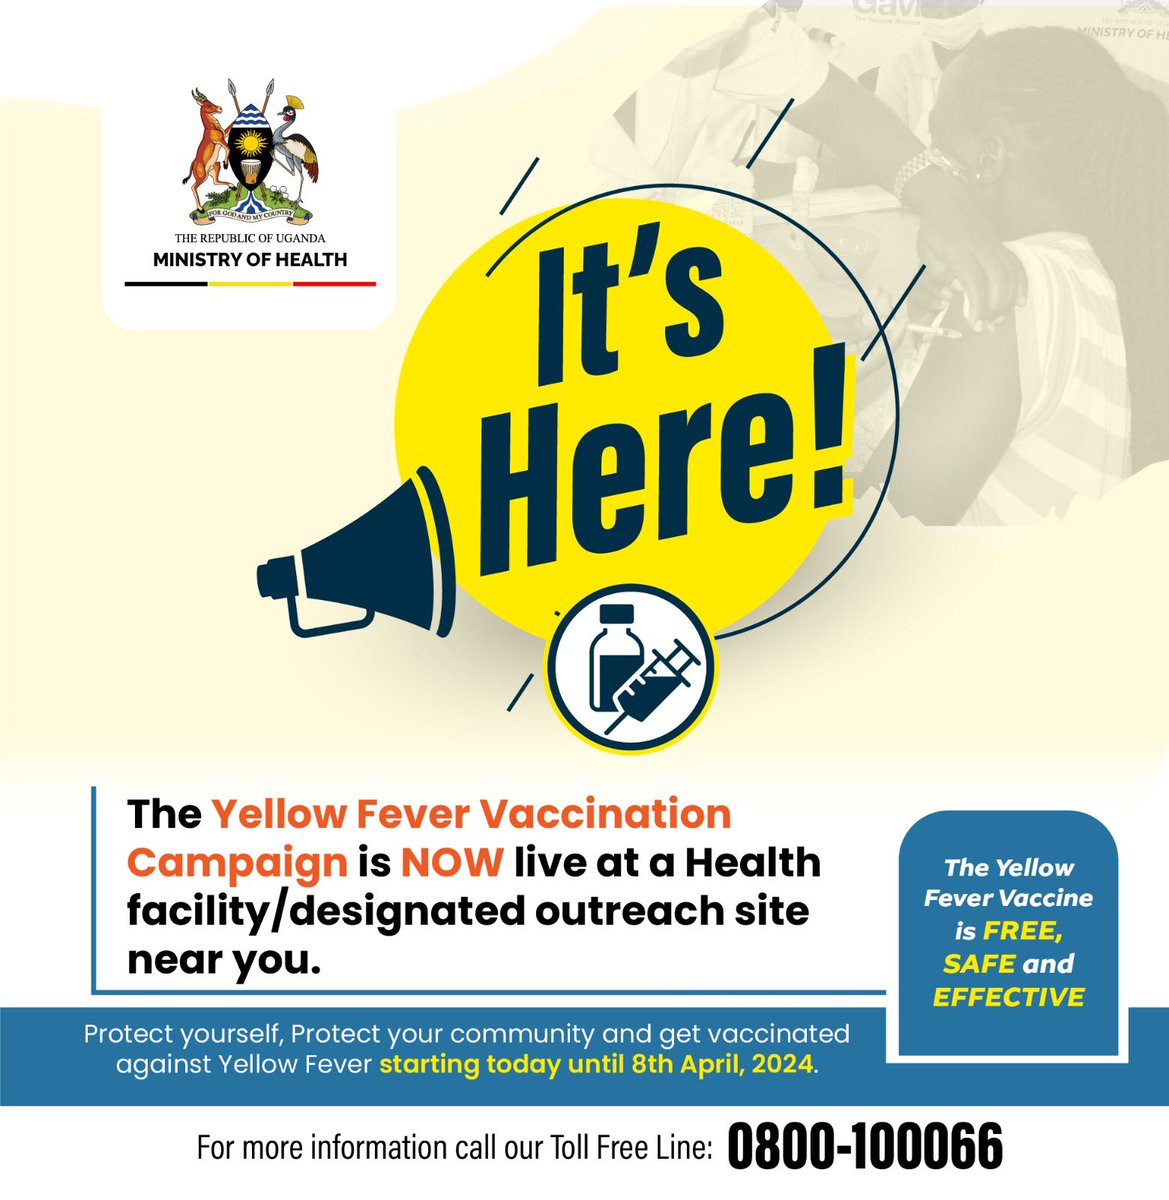 The Yellow Fever Vaccination Campaign kicks off today at a Health Facility/ designated outreach site near you. 

The Yellow Fever vaccine is Free of Charge and gives you lifetime protection against the disease. Get vaccinated today. #YellowFeverFreeUG